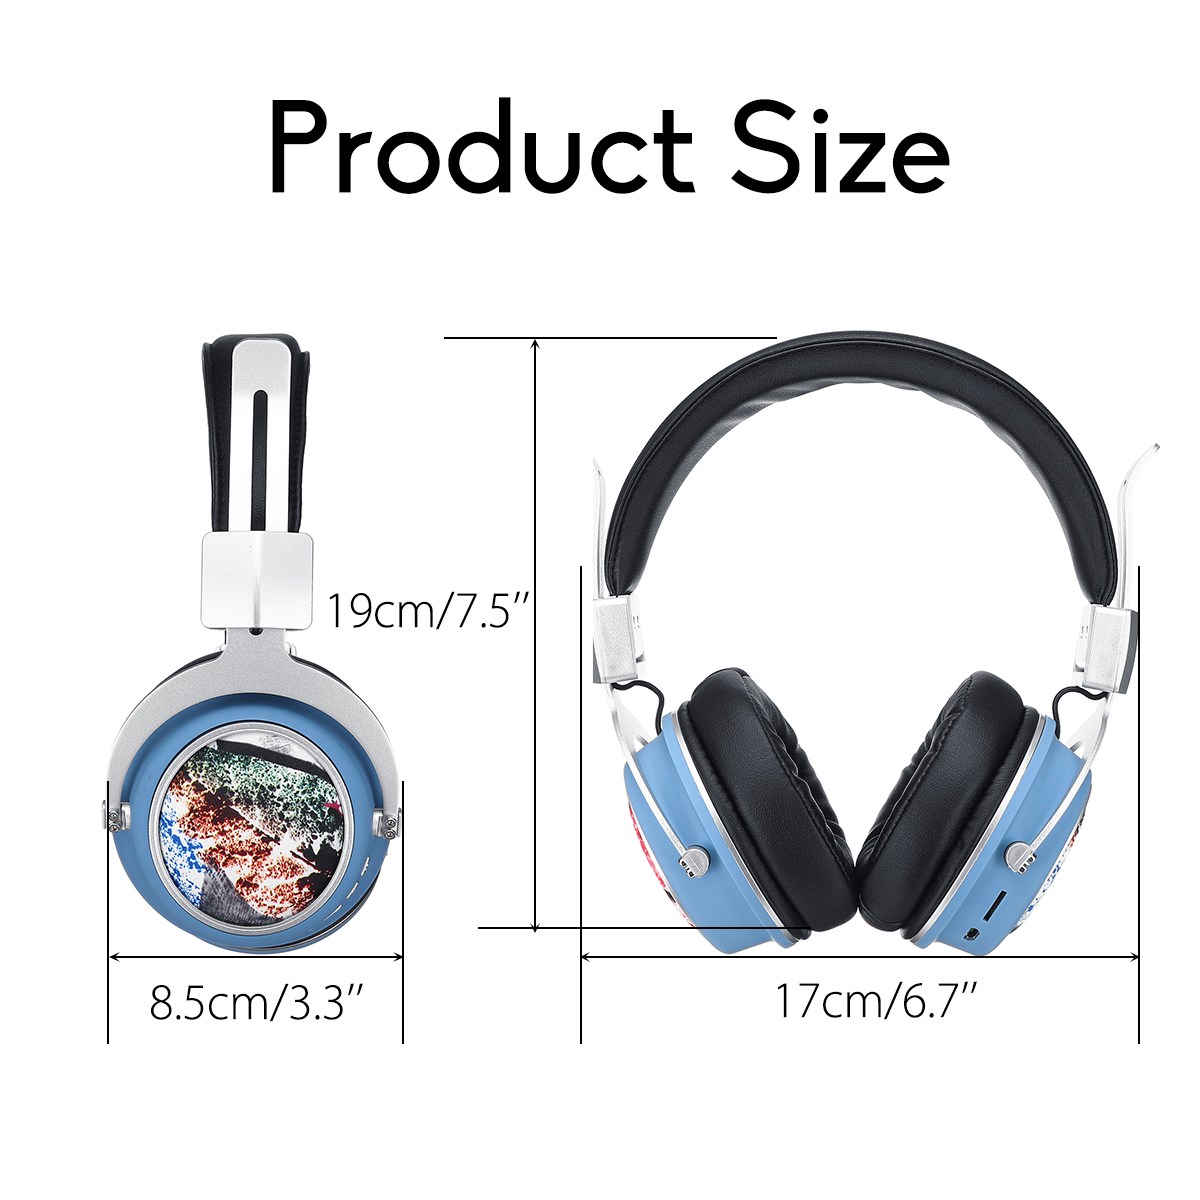 MH5-Wireless-bluetooth-50-Headphone-Foldable-Pattern-3D-Stereo-TF-Card-AUX-Headphone-with-Mic-1477112-11